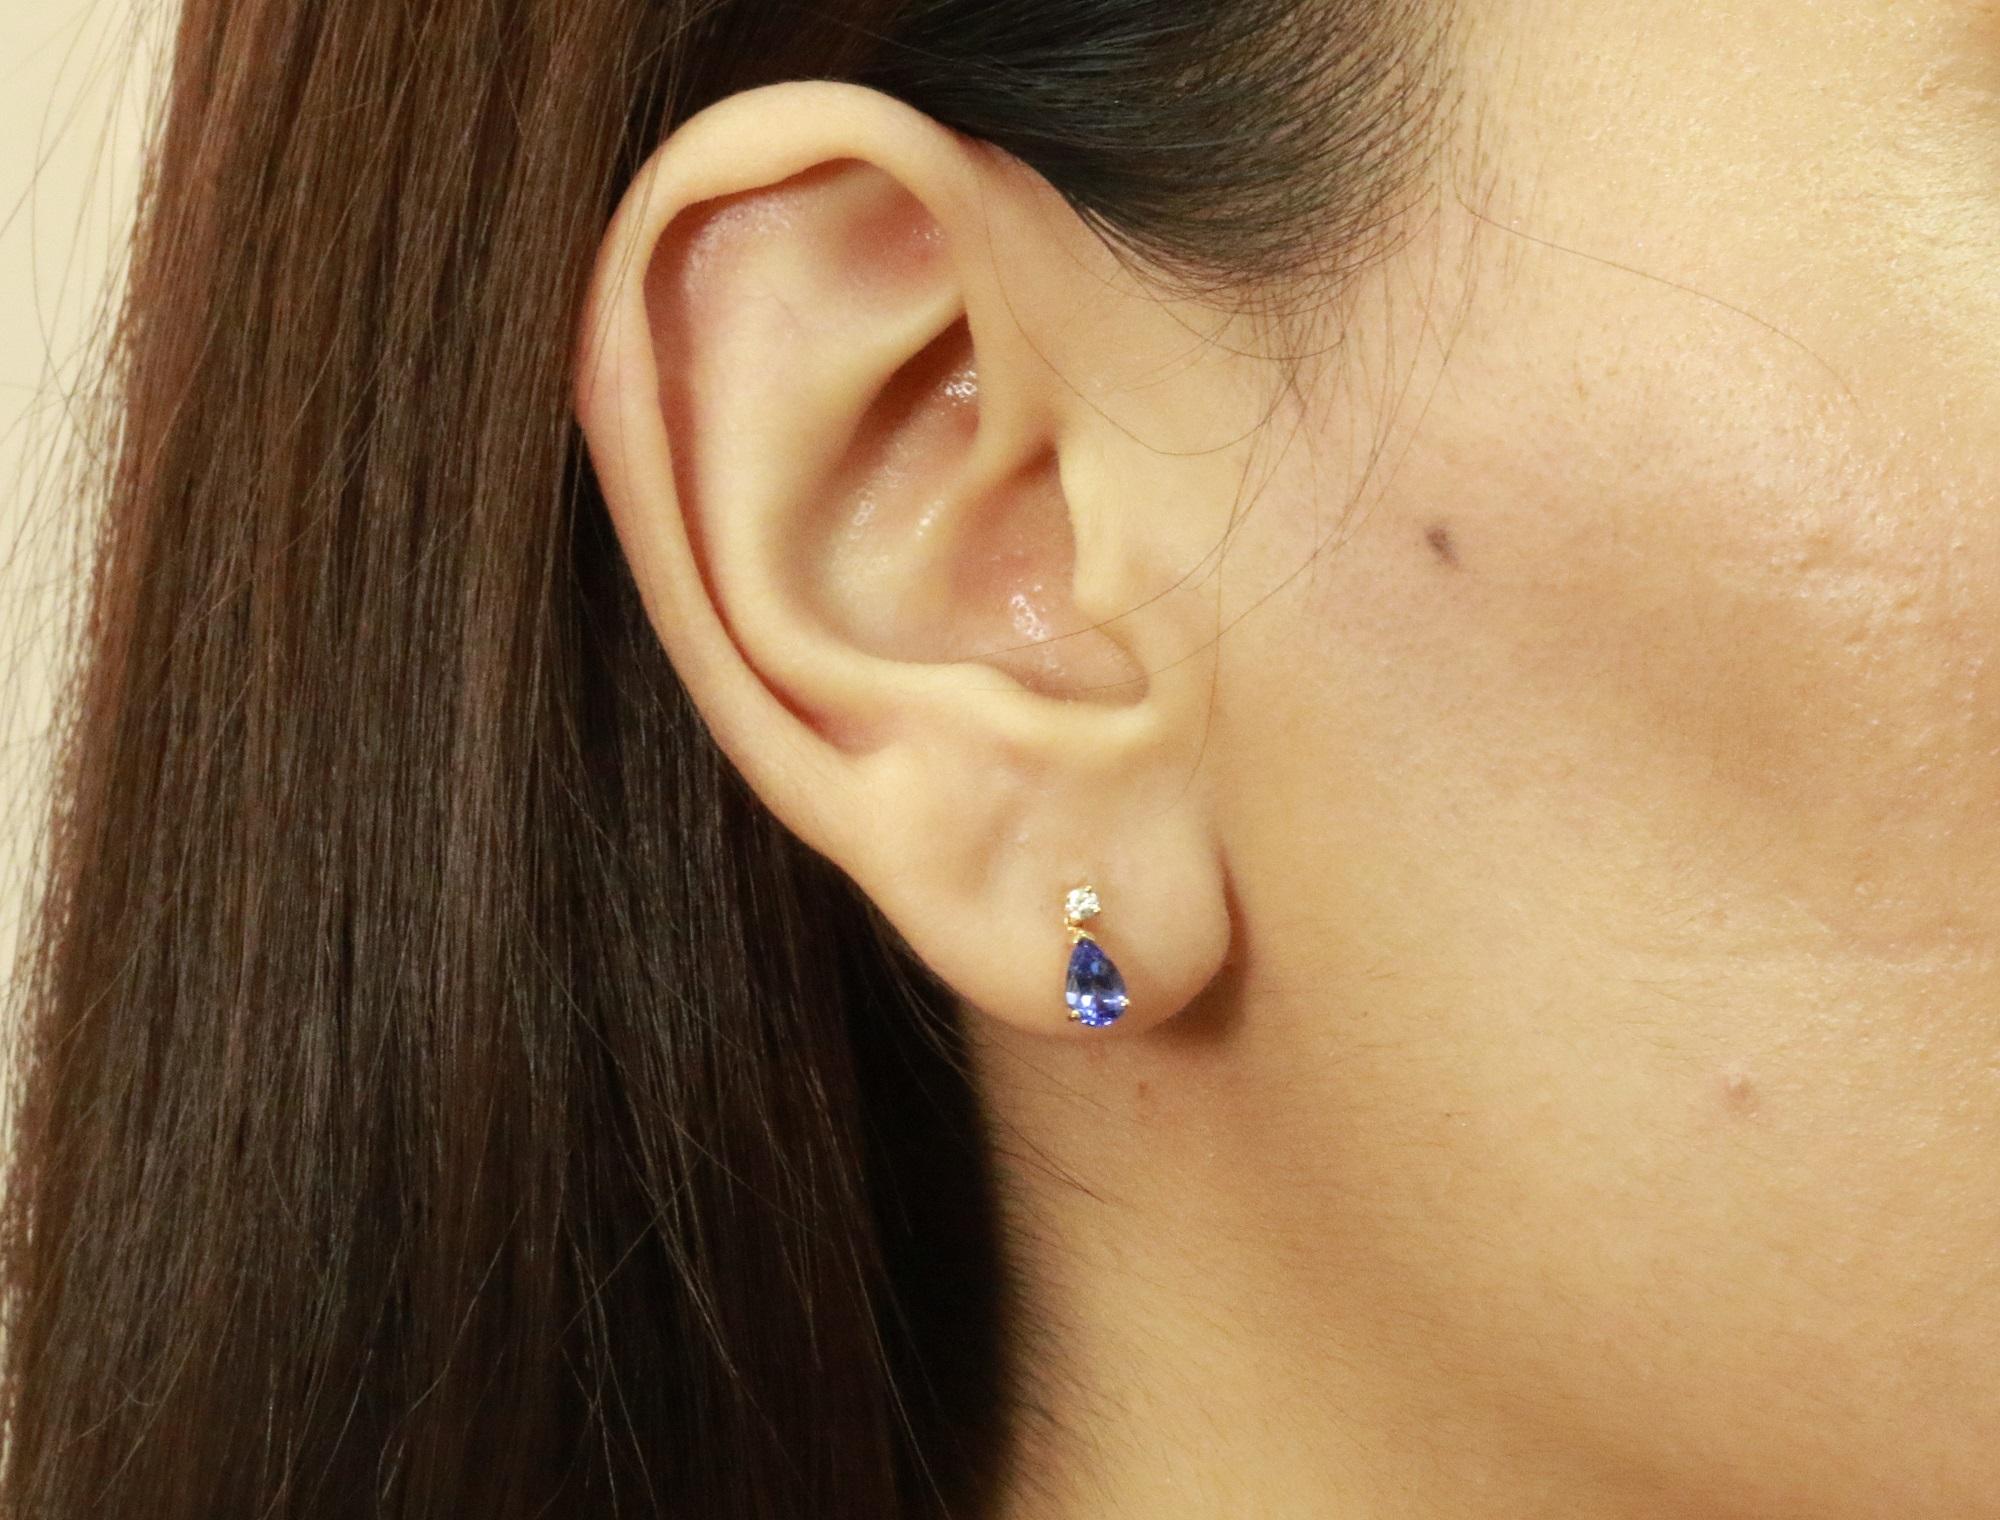 Decorate yourself in elegance with this Earring is crafted from 14K Yellow Gold by Gin & Grace Earring. The jewelry boasts 4X6 Pear-Cut prong setting Genuine Tanzanite (2pcs) 0.83 Carat and Round-Cut prong setting Natural Diamond (2pcs) 0.08 Carat.